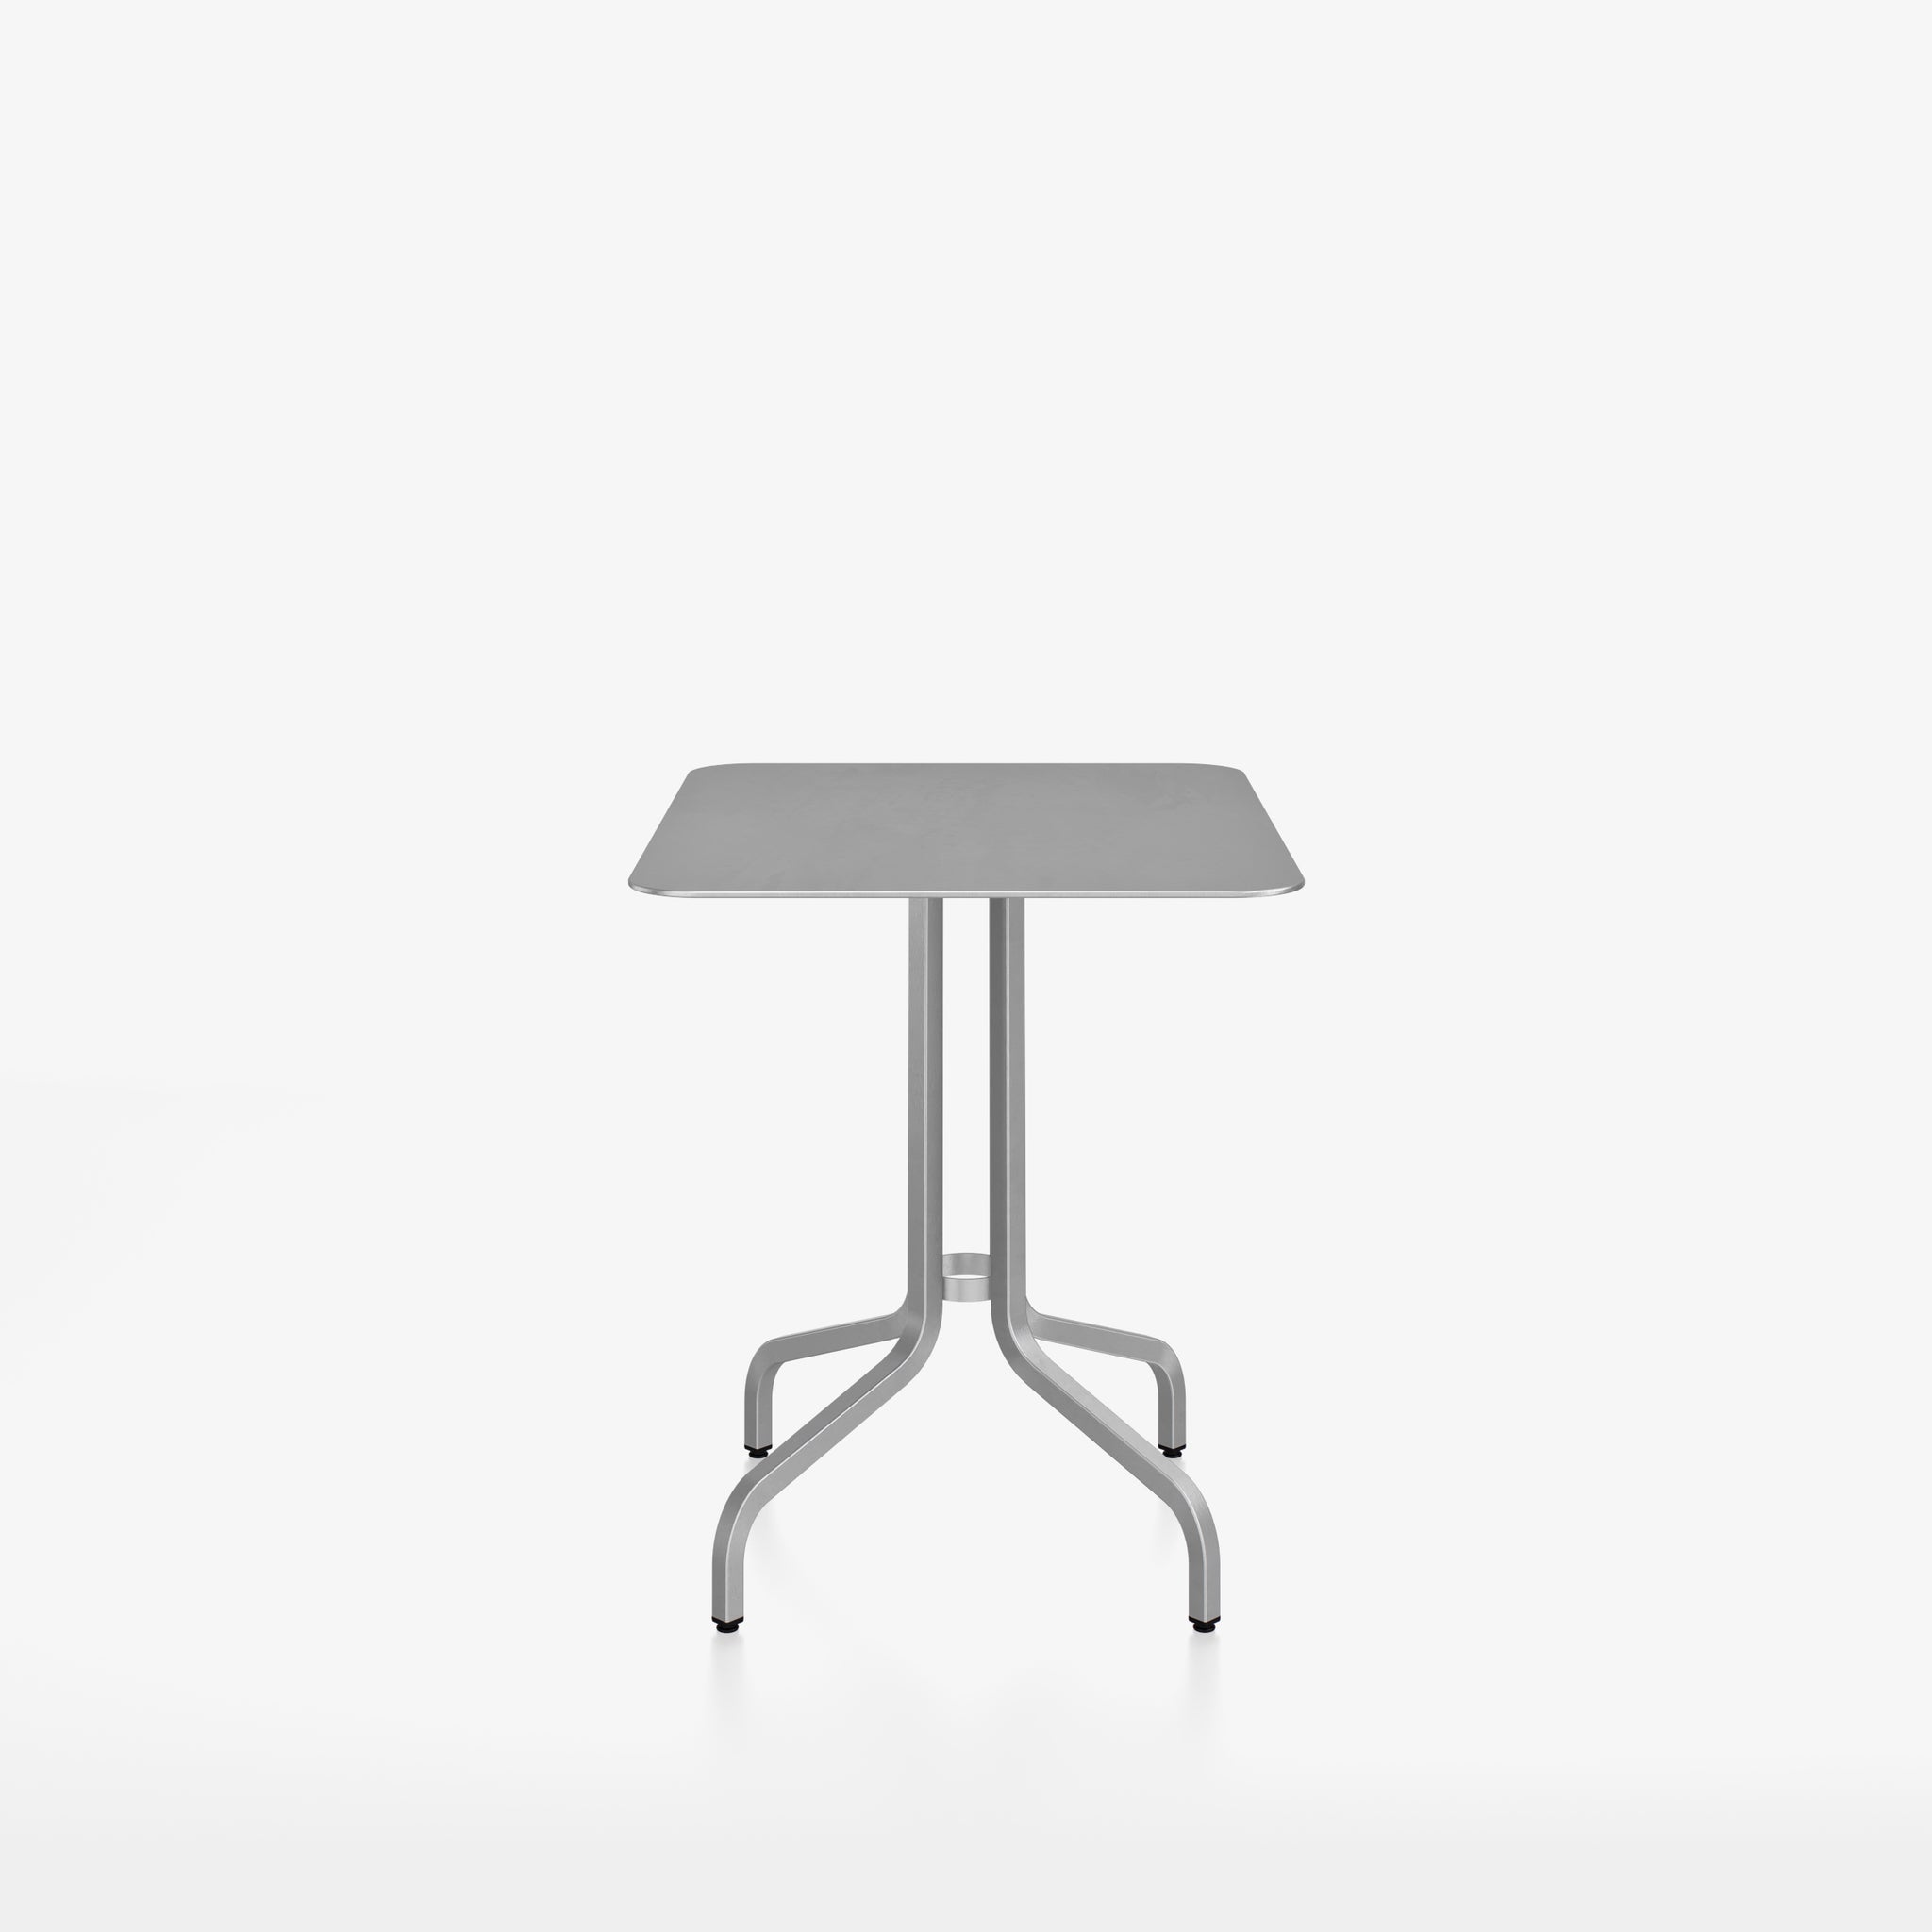 1 Inch Cafe Table